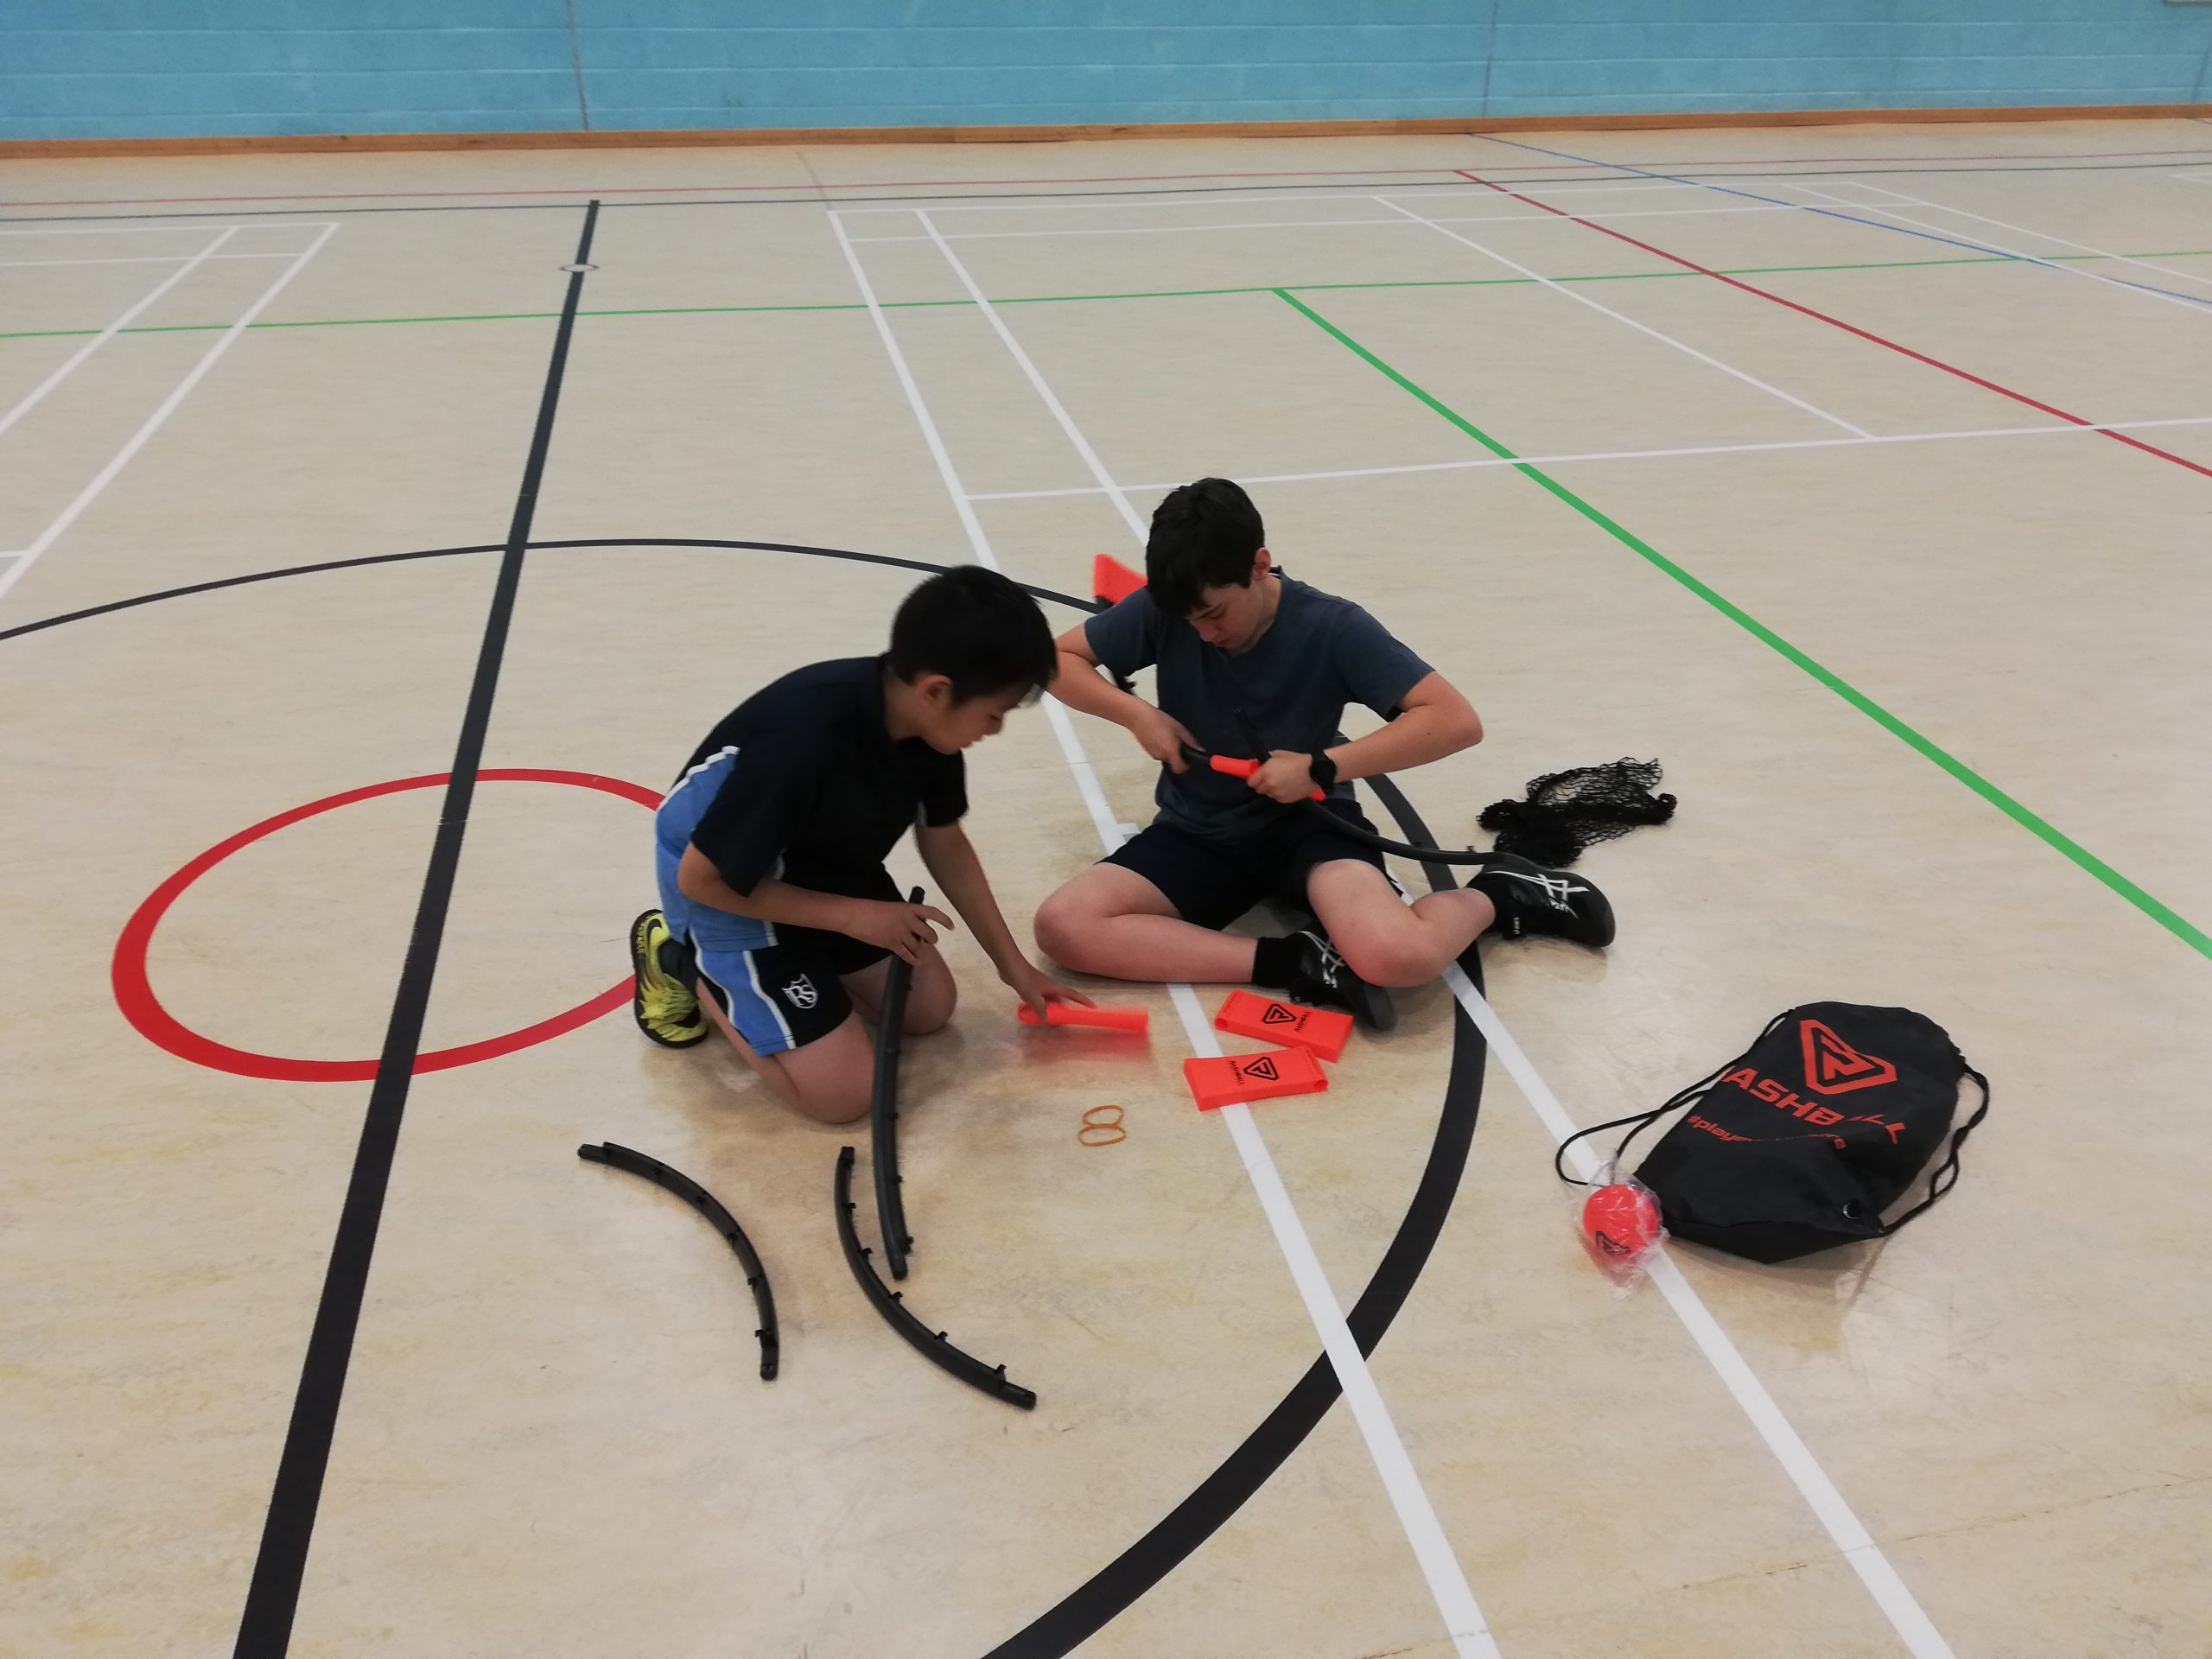 Rookwood School students setting up equipment in a sportshall.